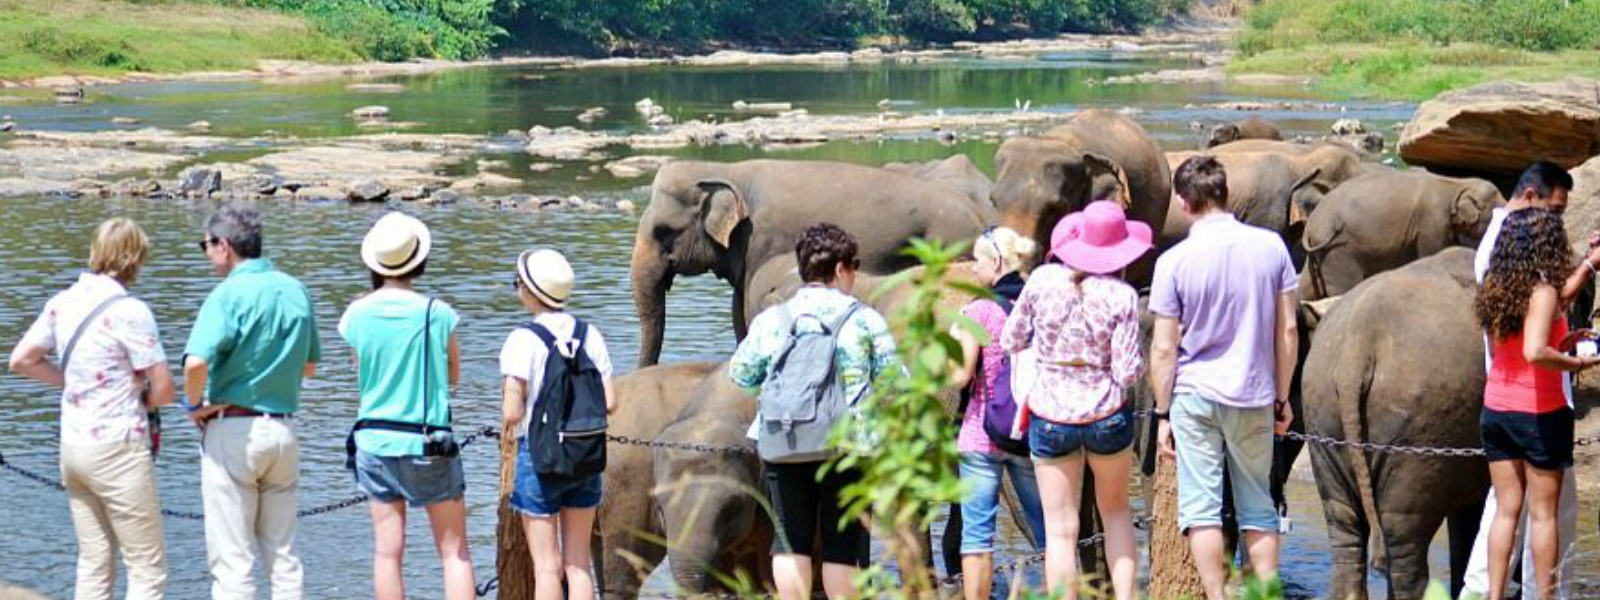 Sri Lanka Tourism issues fresh guidelines for tourists